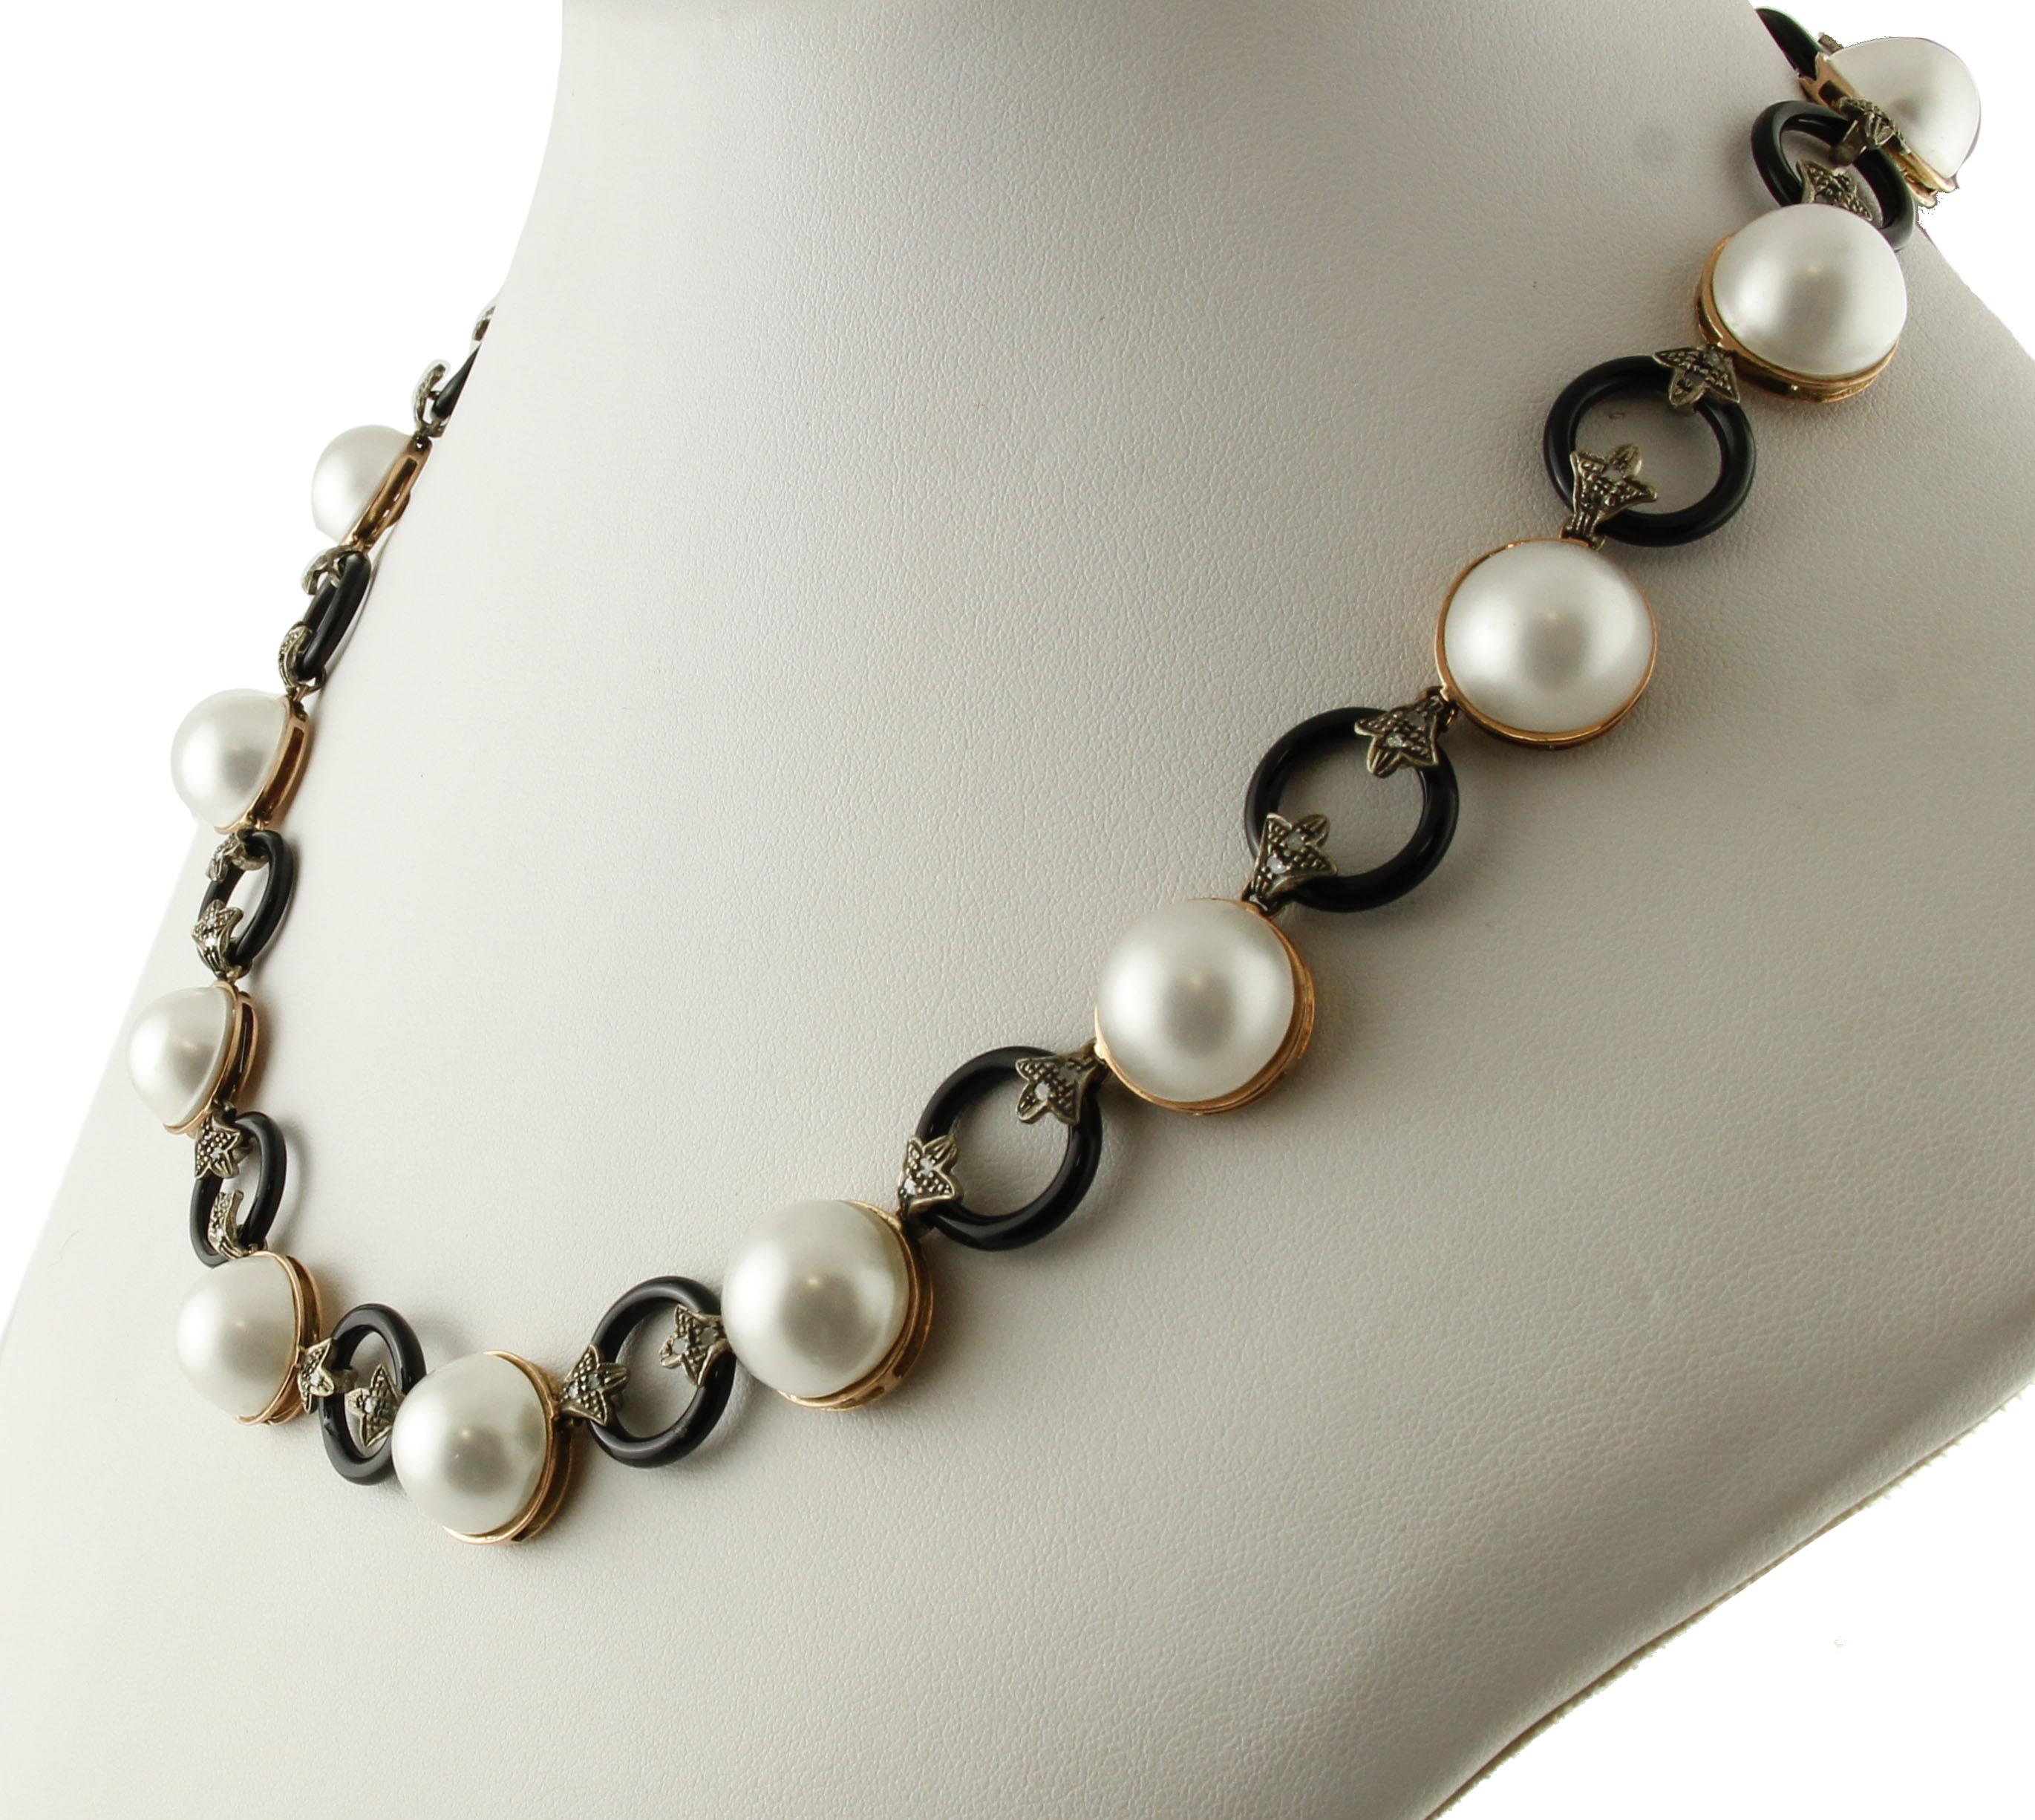 Retro 0.56 Carat Diamonds, 6 G Onyx Rings, 17.4 G Pearls Gold Silver Link Necklace For Sale